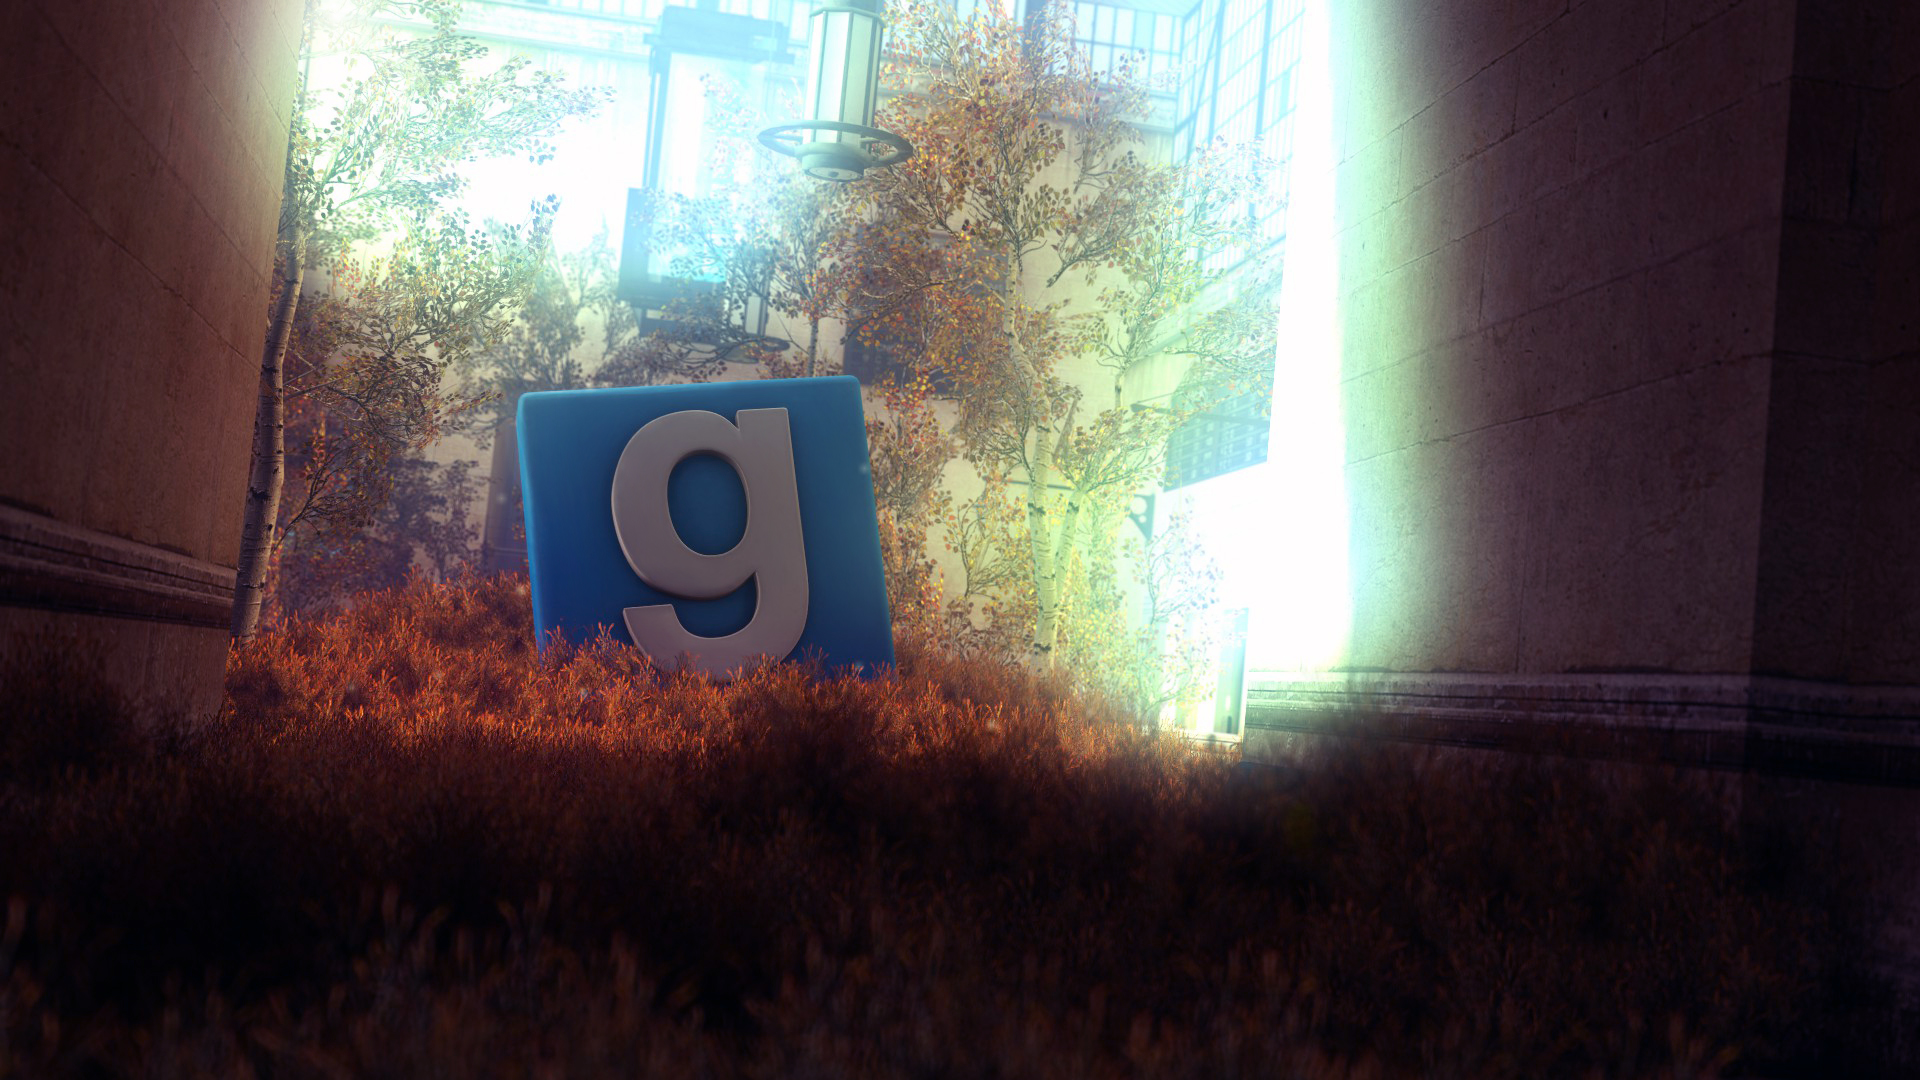 Garry S Mod And Photoshop By Noga14 Fan Art Wallpaper Games